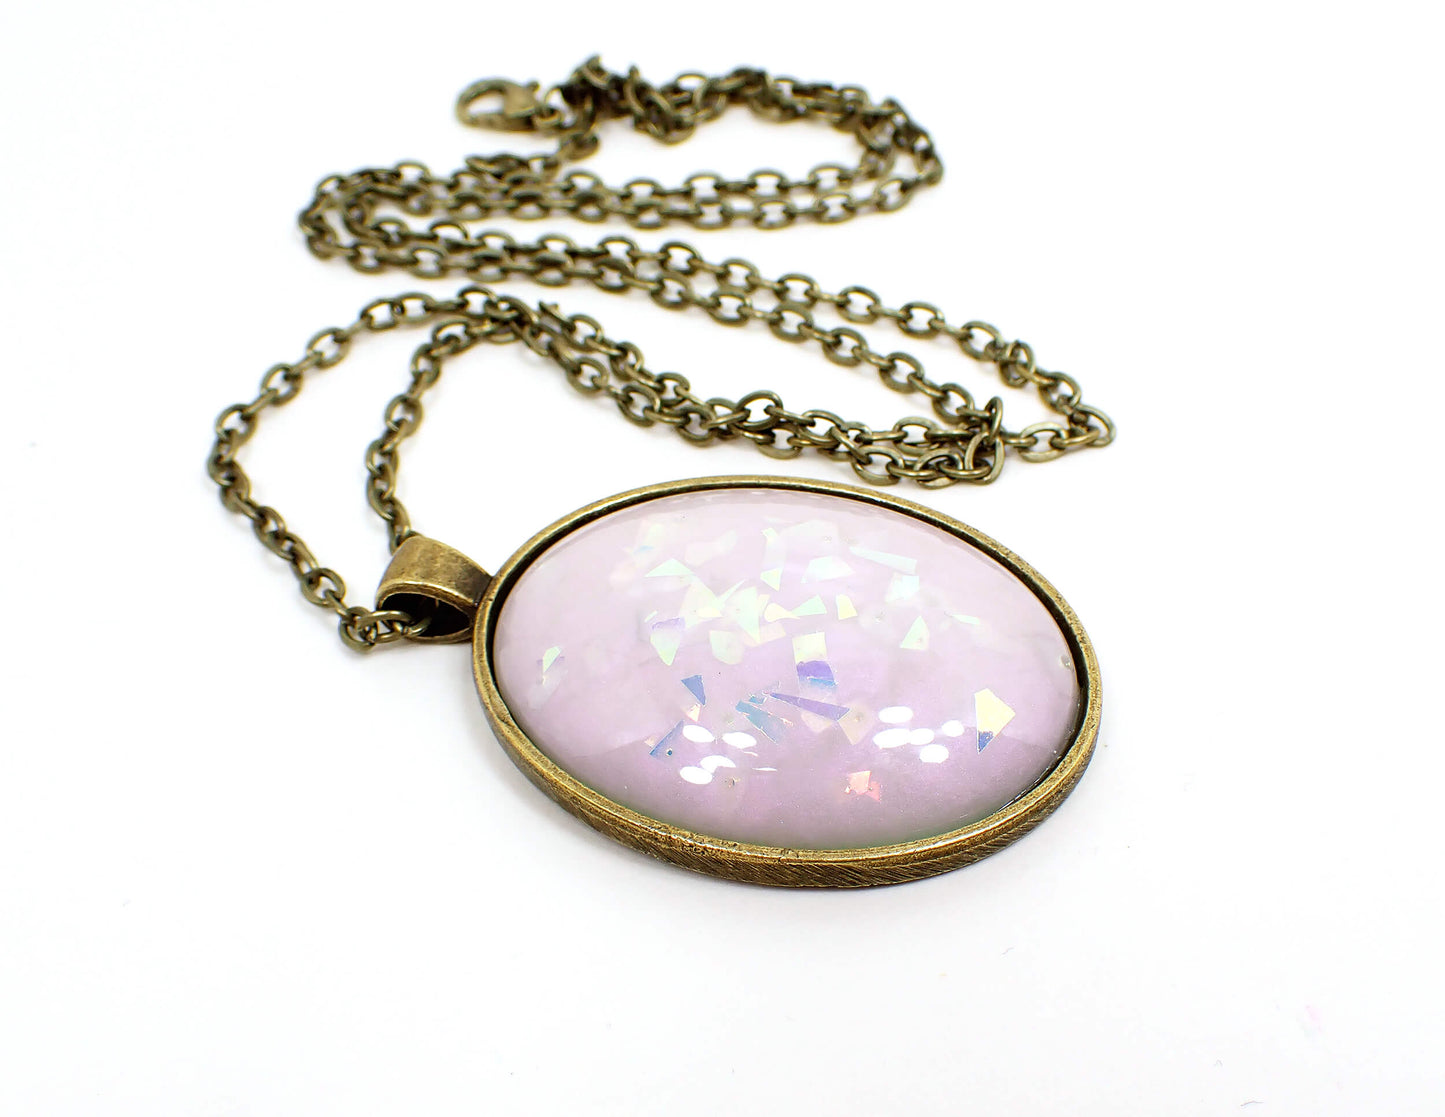 Handmade Off White and Pink Color Shift Resin Oval Glitter Pendant Necklace